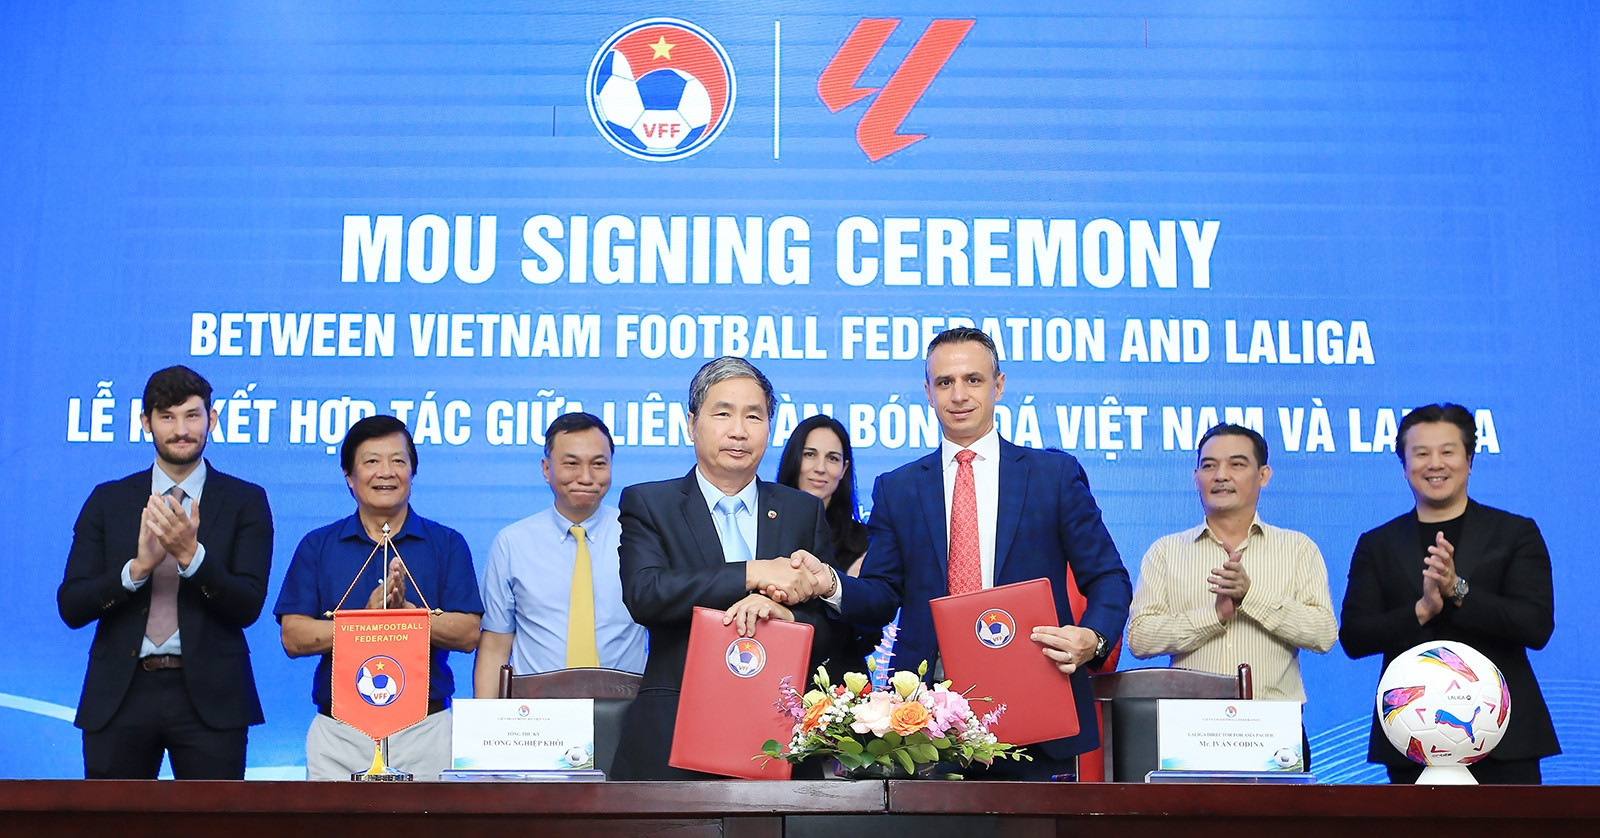 VFF works with La Liga to help VN national team take part in World Cup